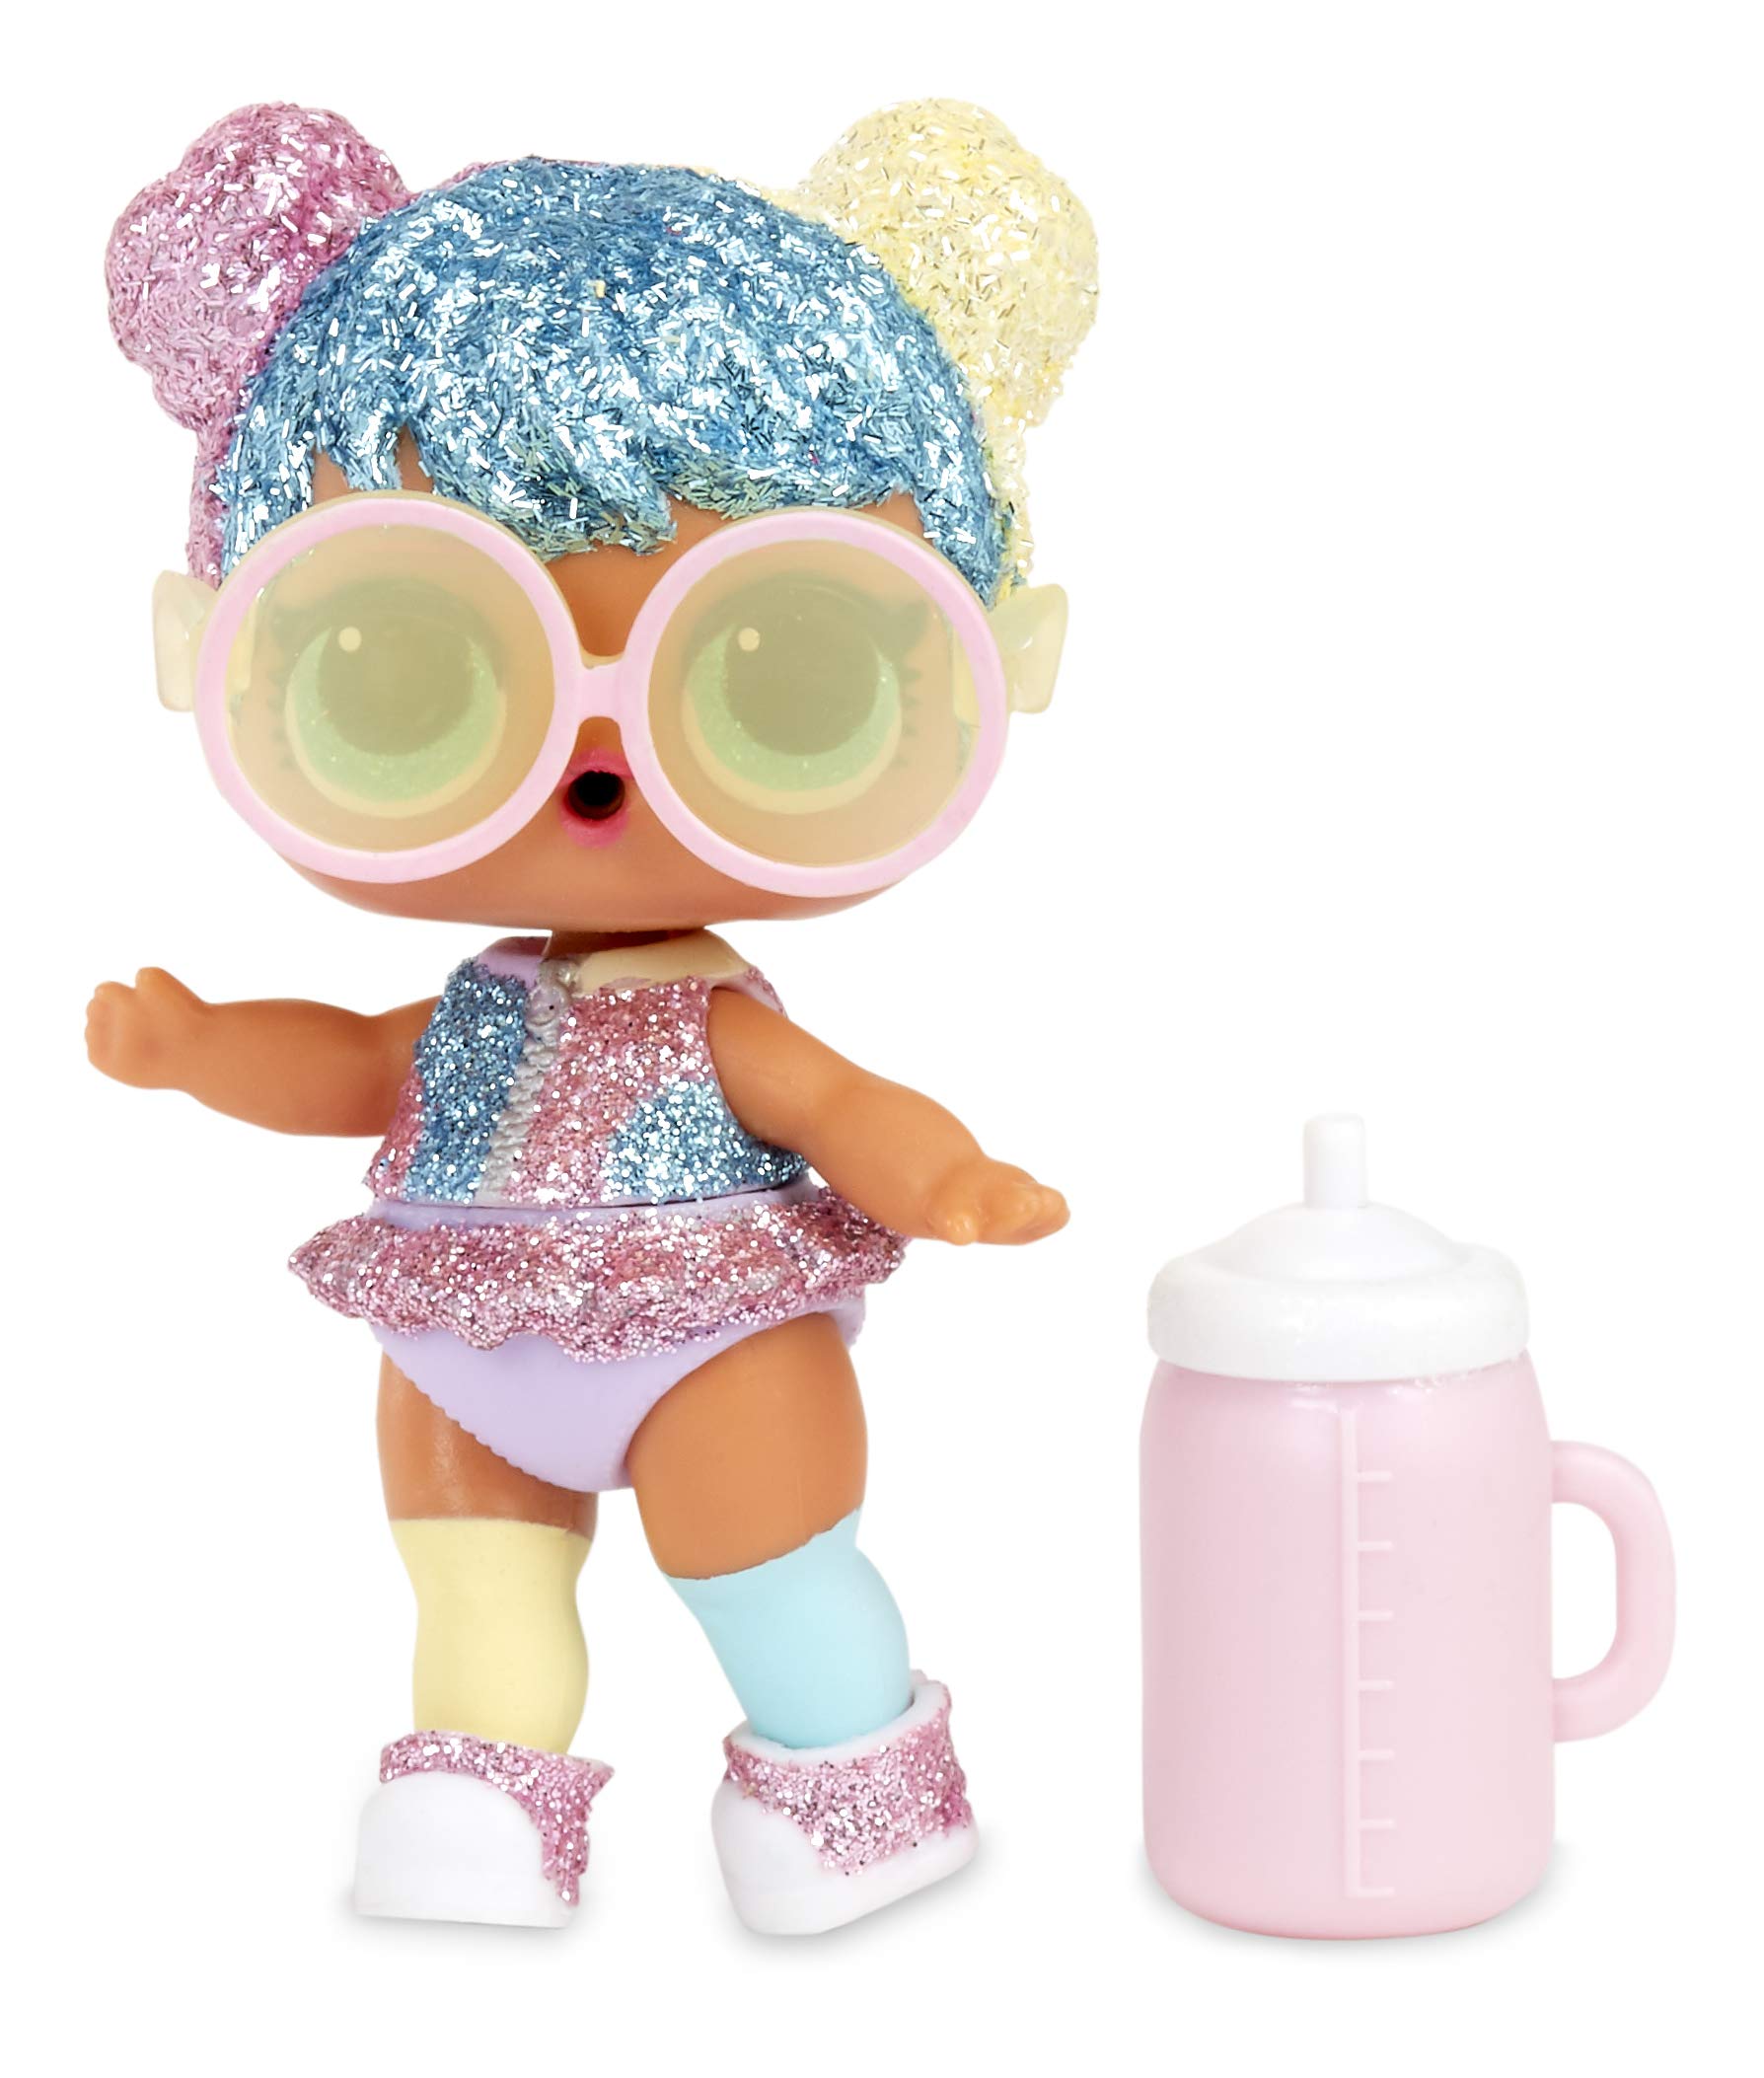 L.O.L. Surprise Bling Series with Glitter Details & Doll Display, Multicolor